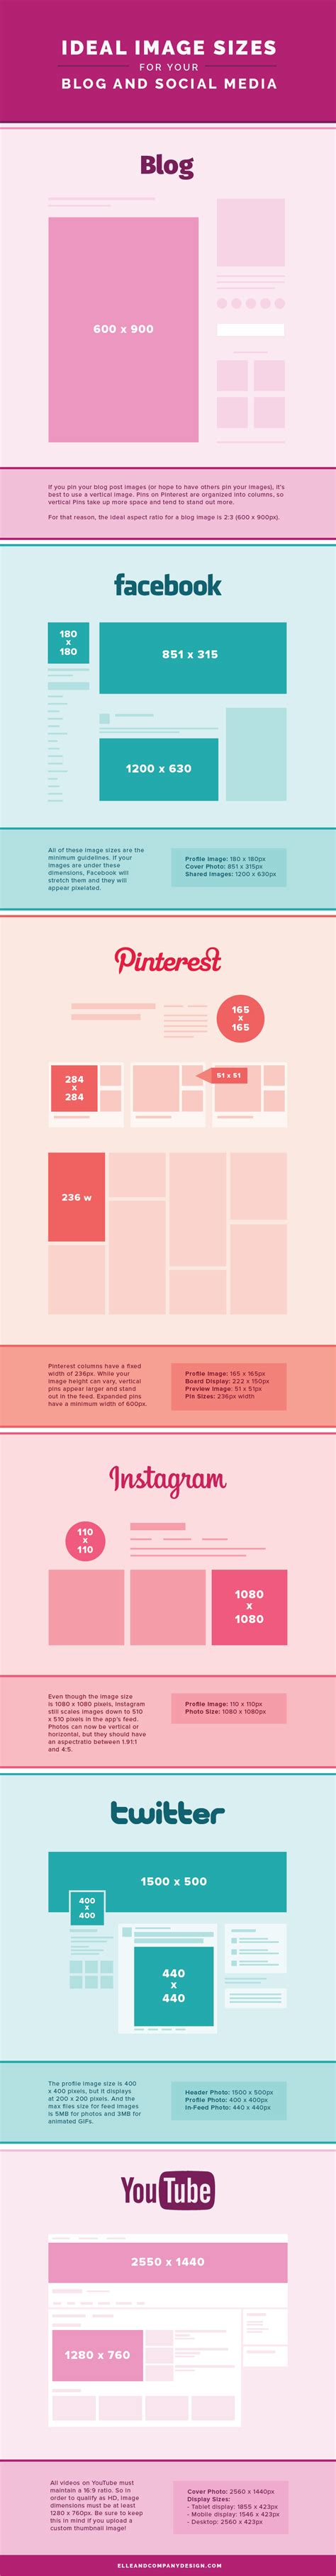 Ideal Image Sizes For Your Blog And Social Media Ideal Image Social